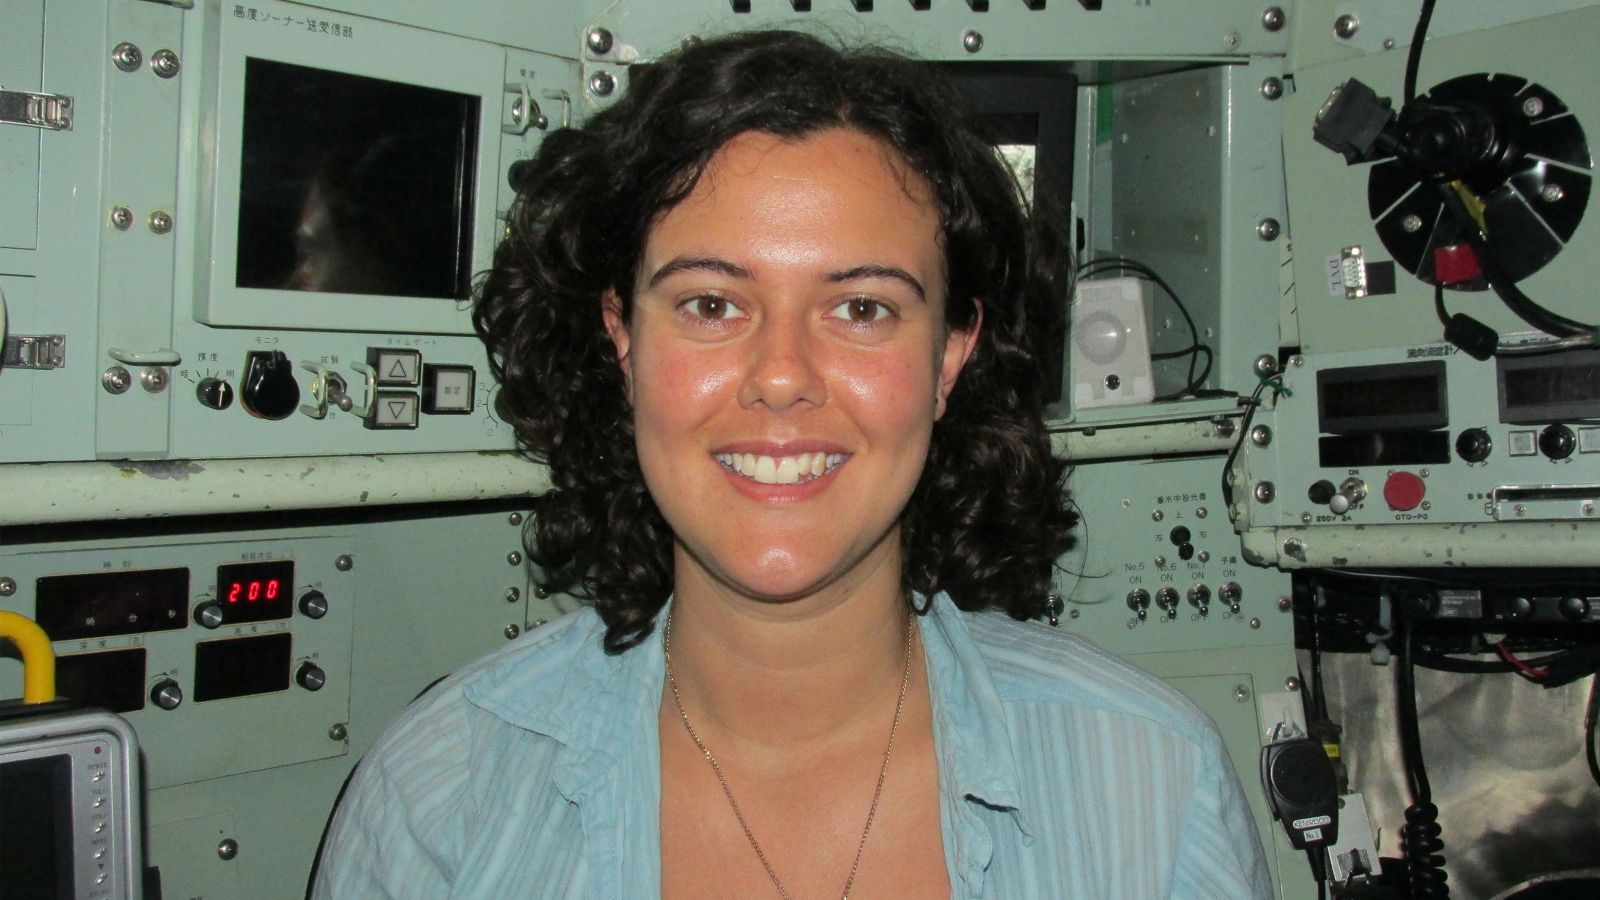 Rachel Boschen photographed during a research voyage